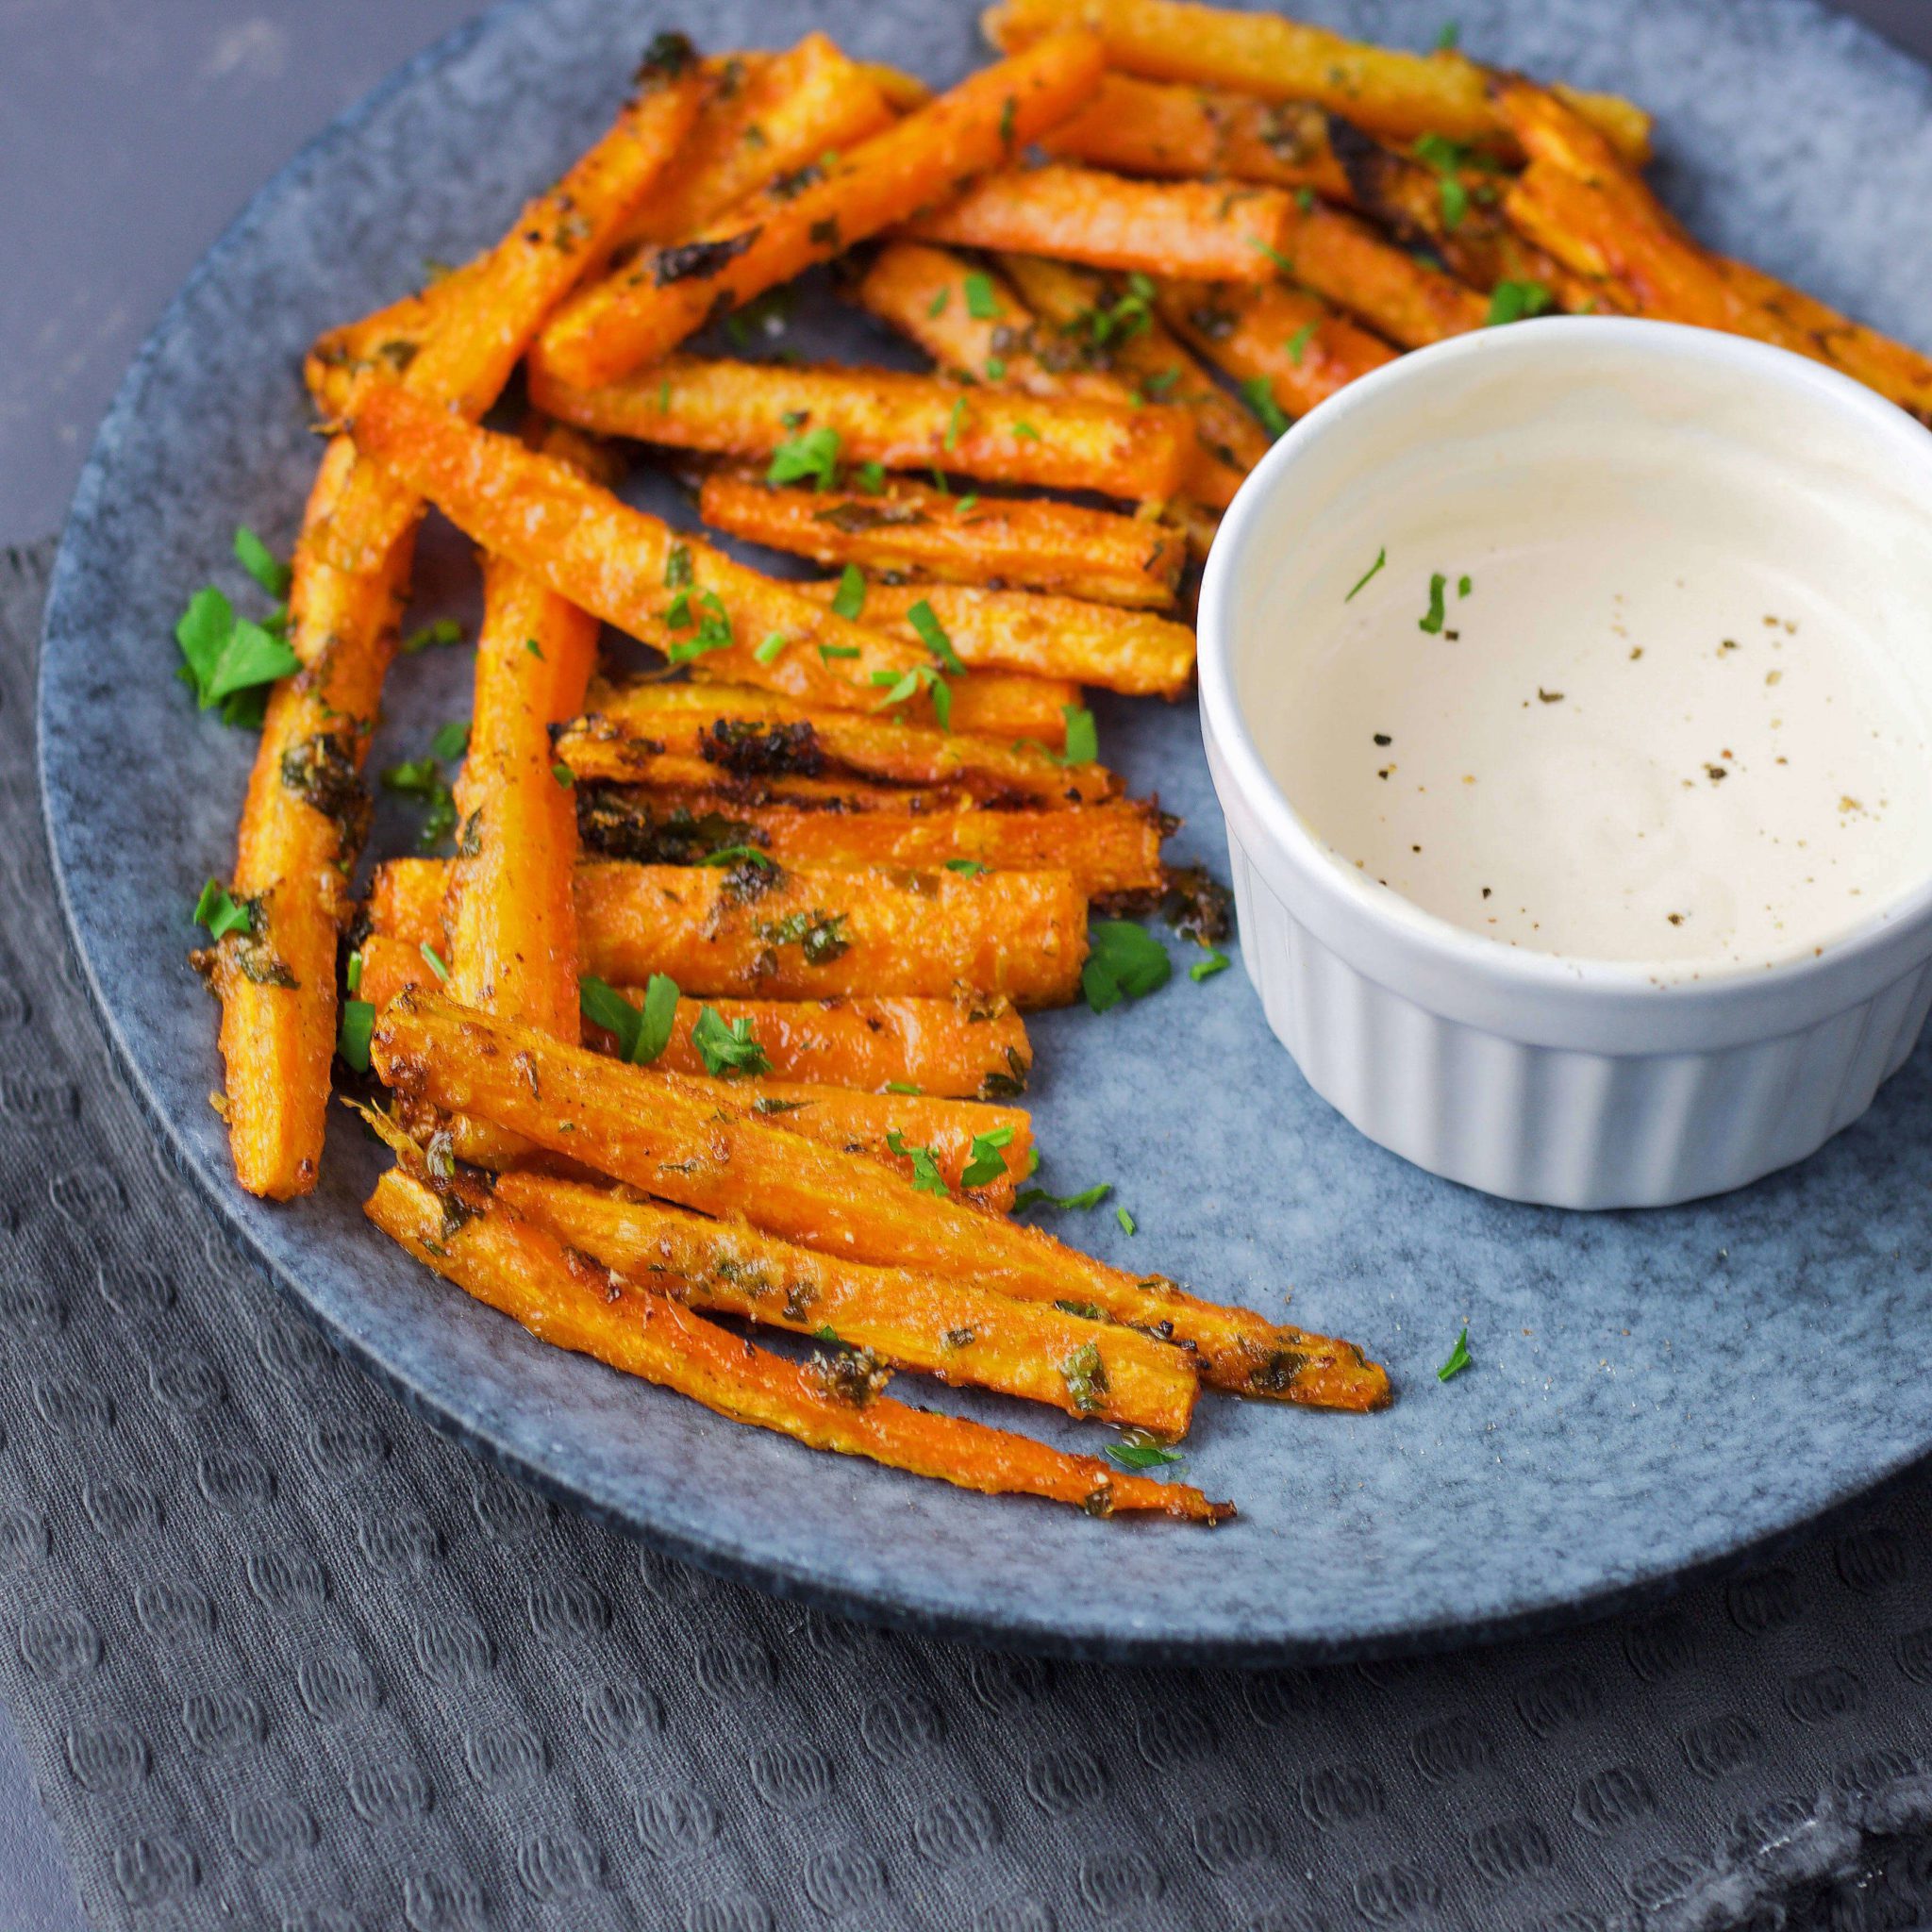 This easy carrot and garlic fries, pumped with perfect vegan Parmesan and vegan mayo dip are ready in 30 minutes.